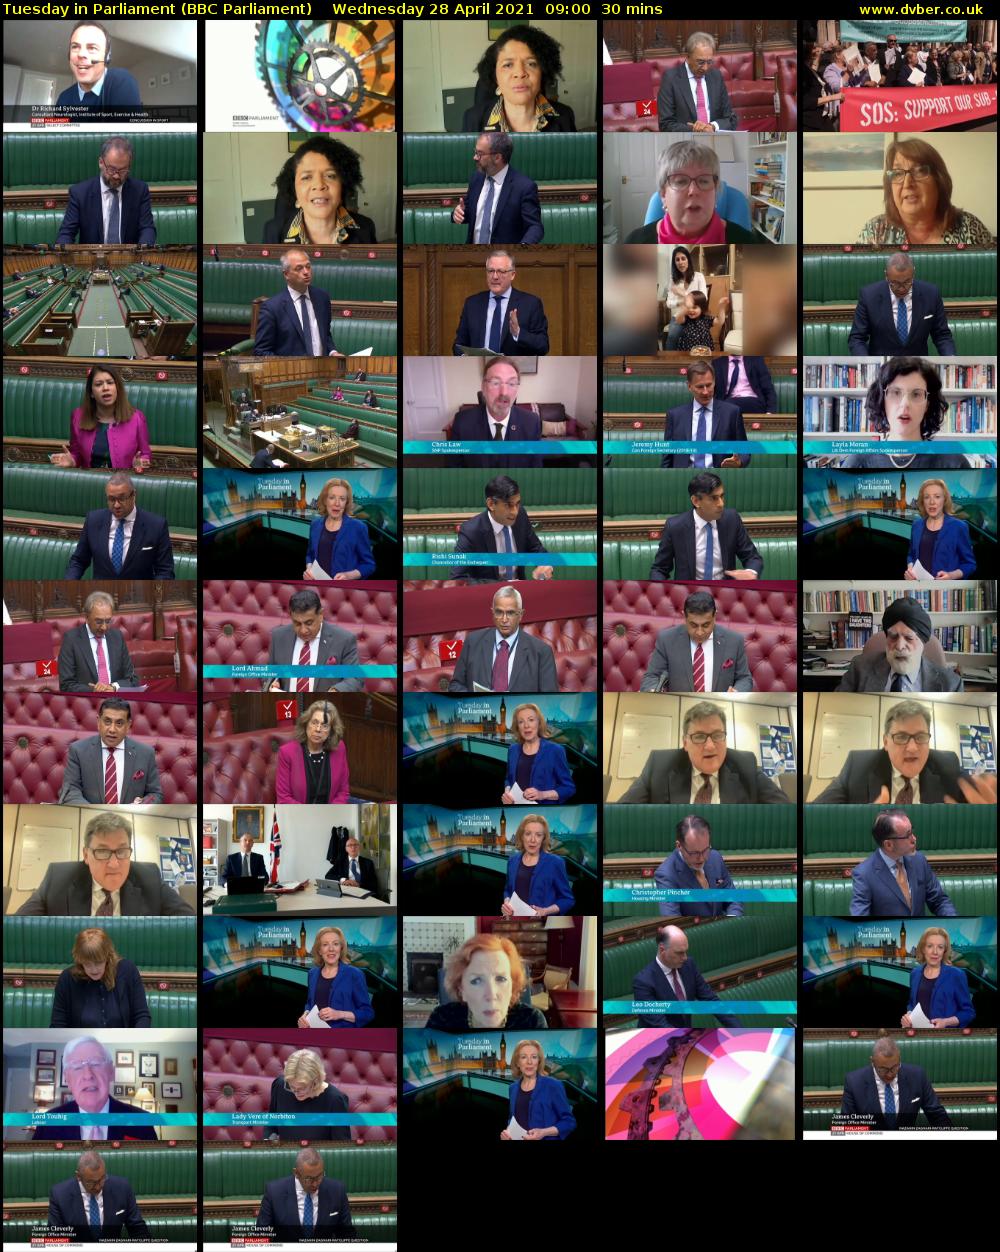 Tuesday in Parliament (BBC Parliament) Wednesday 28 April 2021 09:00 - 09:30